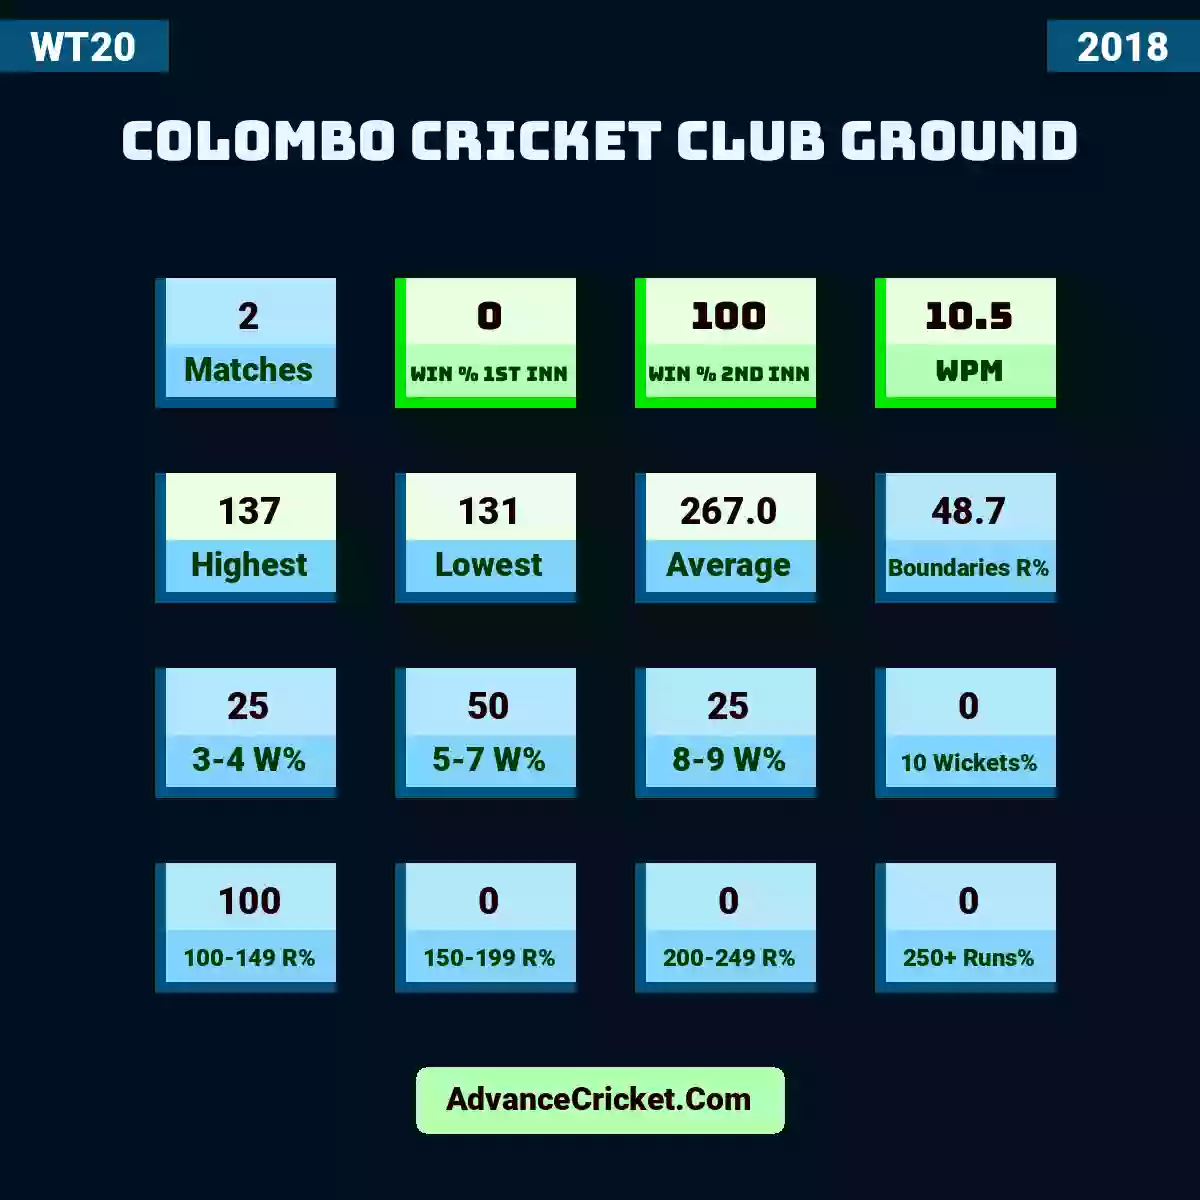 Image showing Colombo Cricket Club Ground with Matches: 2, Win % 1st Inn: 0, Win % 2nd Inn: 100, WPM: 10.5, Highest: 137, Lowest: 131, Average: 267.0, Boundaries R%: 48.7, 3-4 W%: 25, 5-7 W%: 50, 8-9 W%: 25, 10 Wickets%: 0, 100-149 R%: 100, 150-199 R%: 0, 200-249 R%: 0, 250+ Runs%: 0.